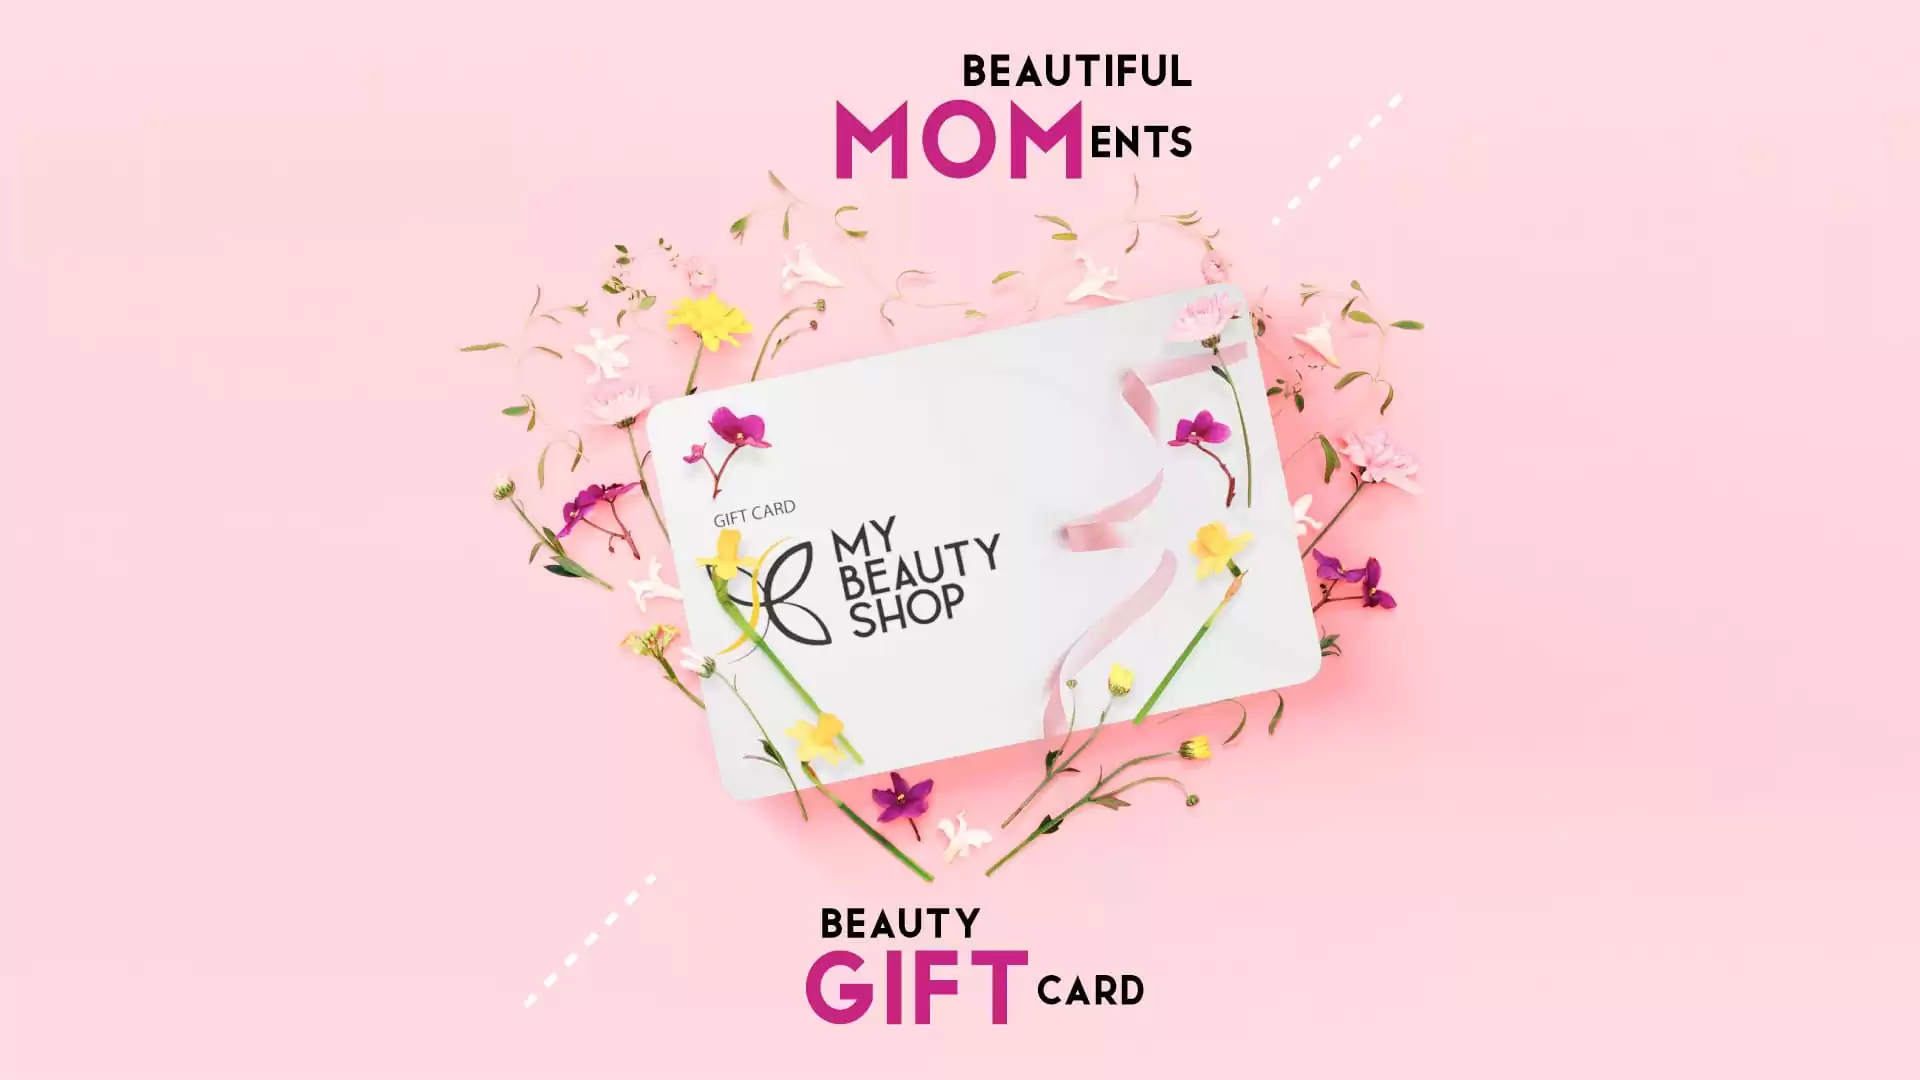 My-Beauty-Shop-Campagna-Pubblicitaria-Gift-Card